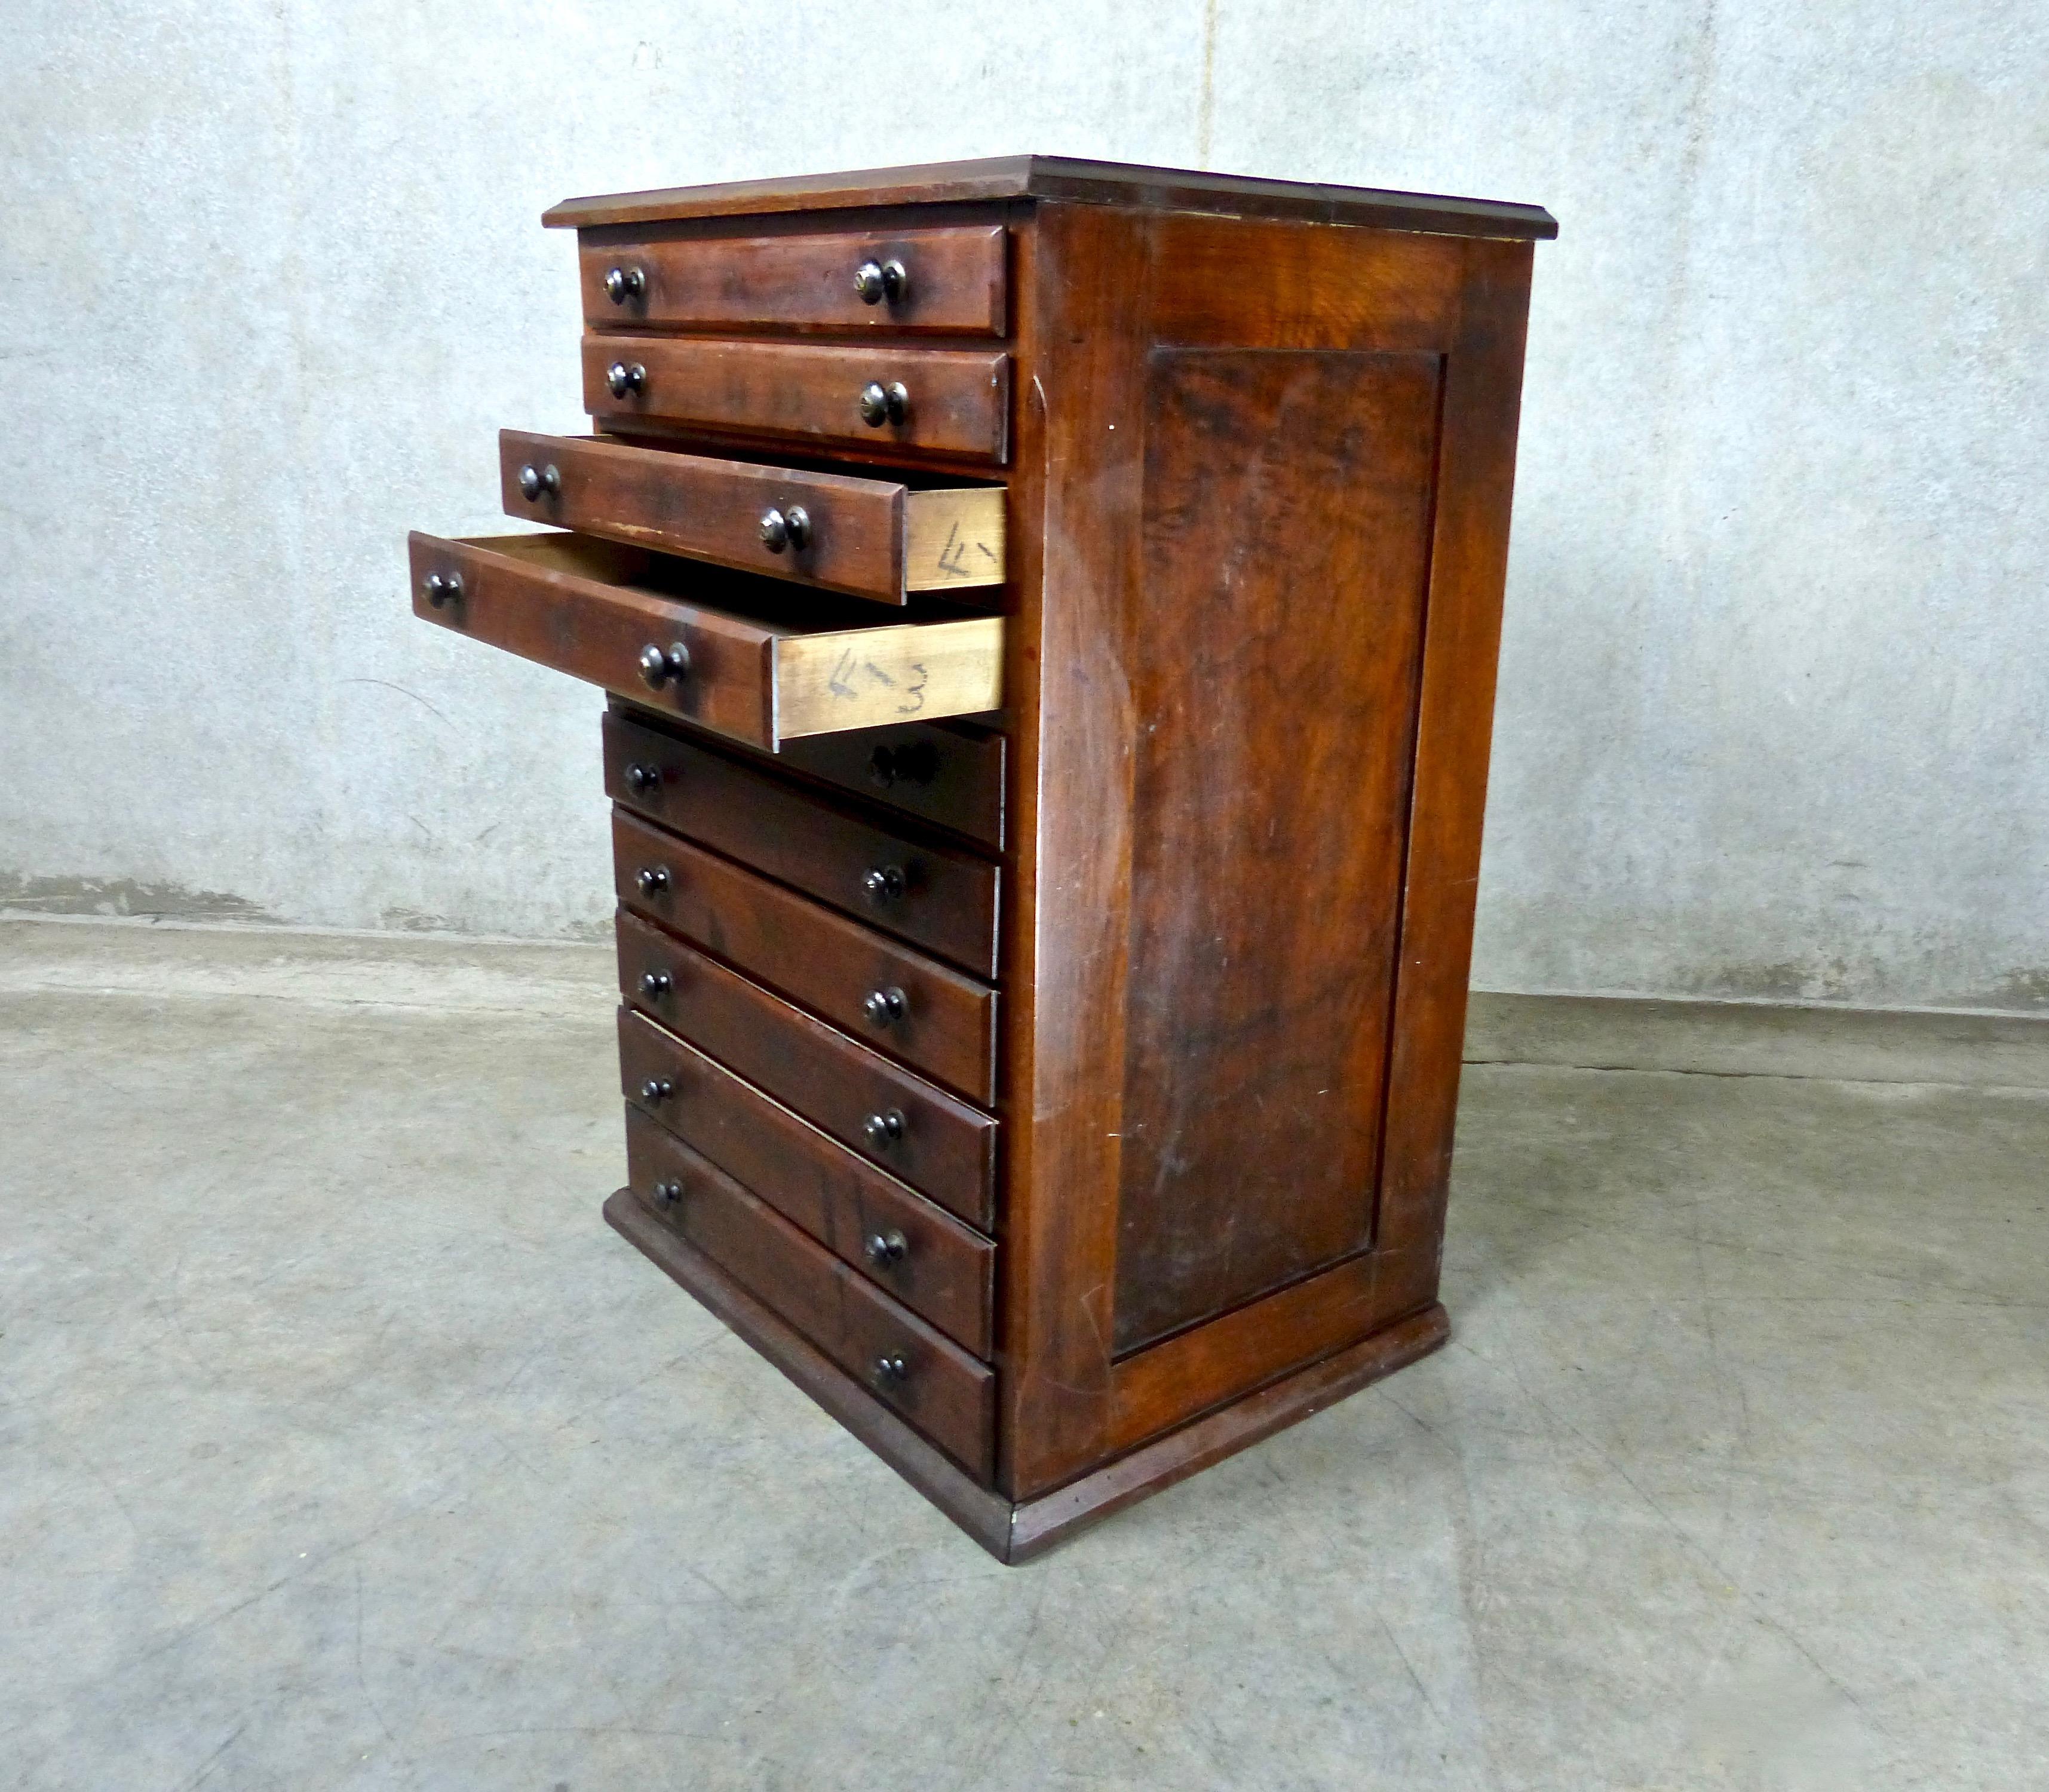 Compact oak dental cabinet with pine secondary woods. Features 10, 2-inch high drawers for art, blueprints, and other fragile small works. Original surfaces and hardware. Dimensions: 31” H x 21.5” W x 16.5” D.